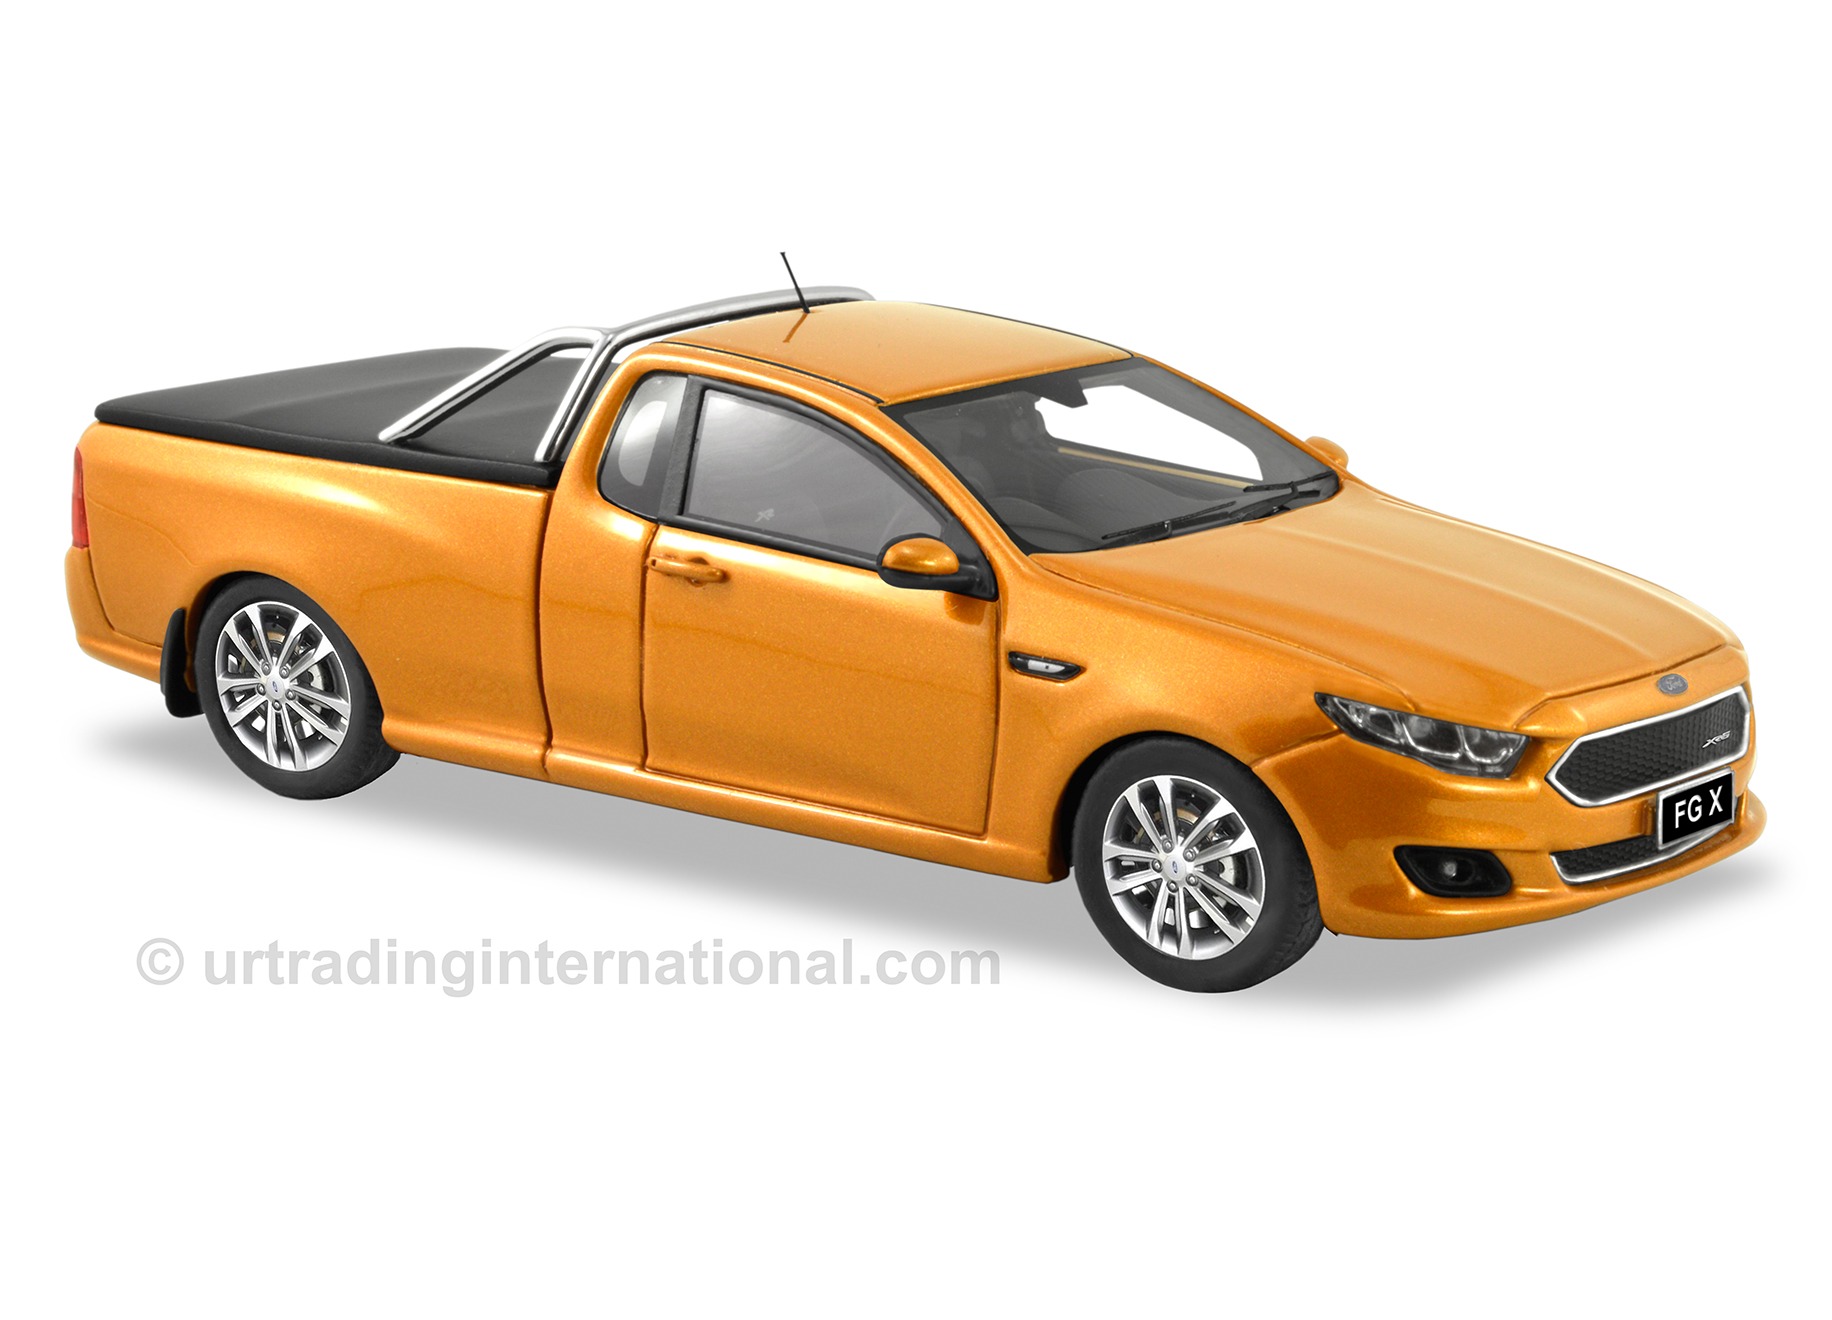 2016 Ford FGX XR6 Ute – Victory Gold